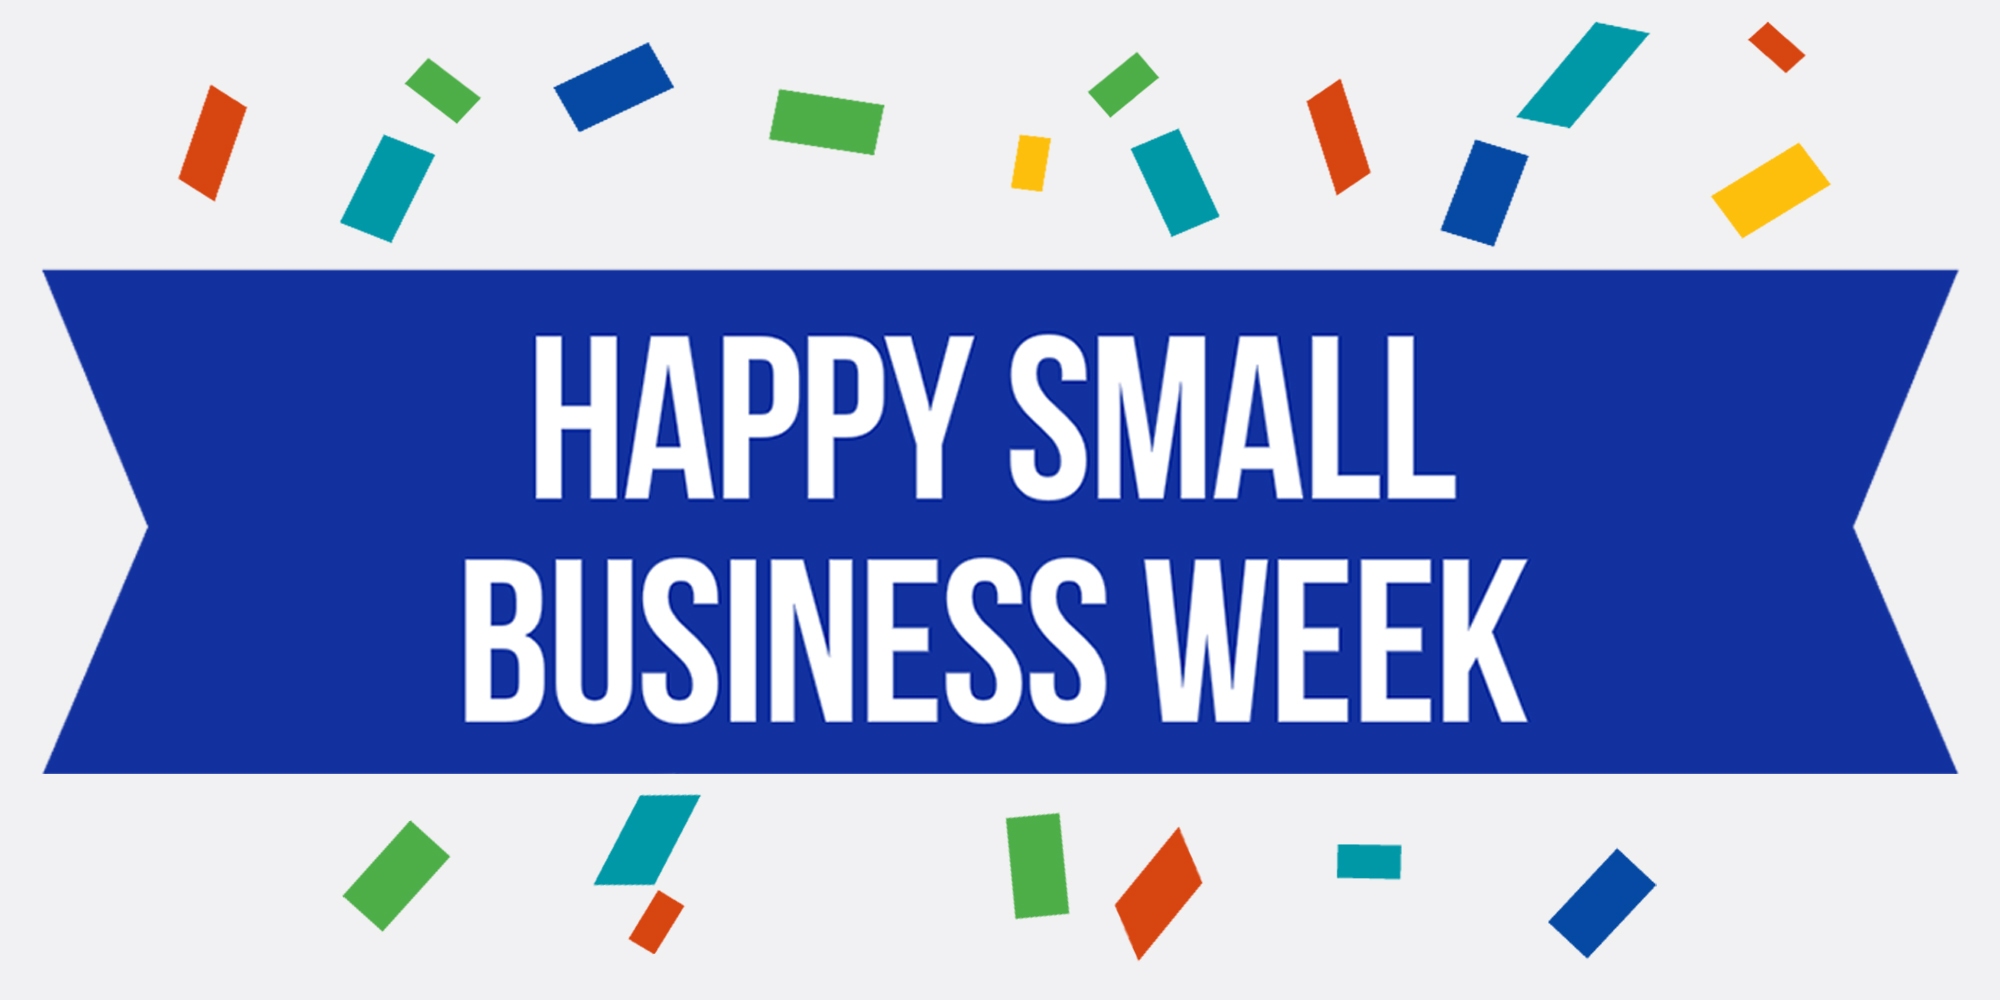 Happy Small Business Week